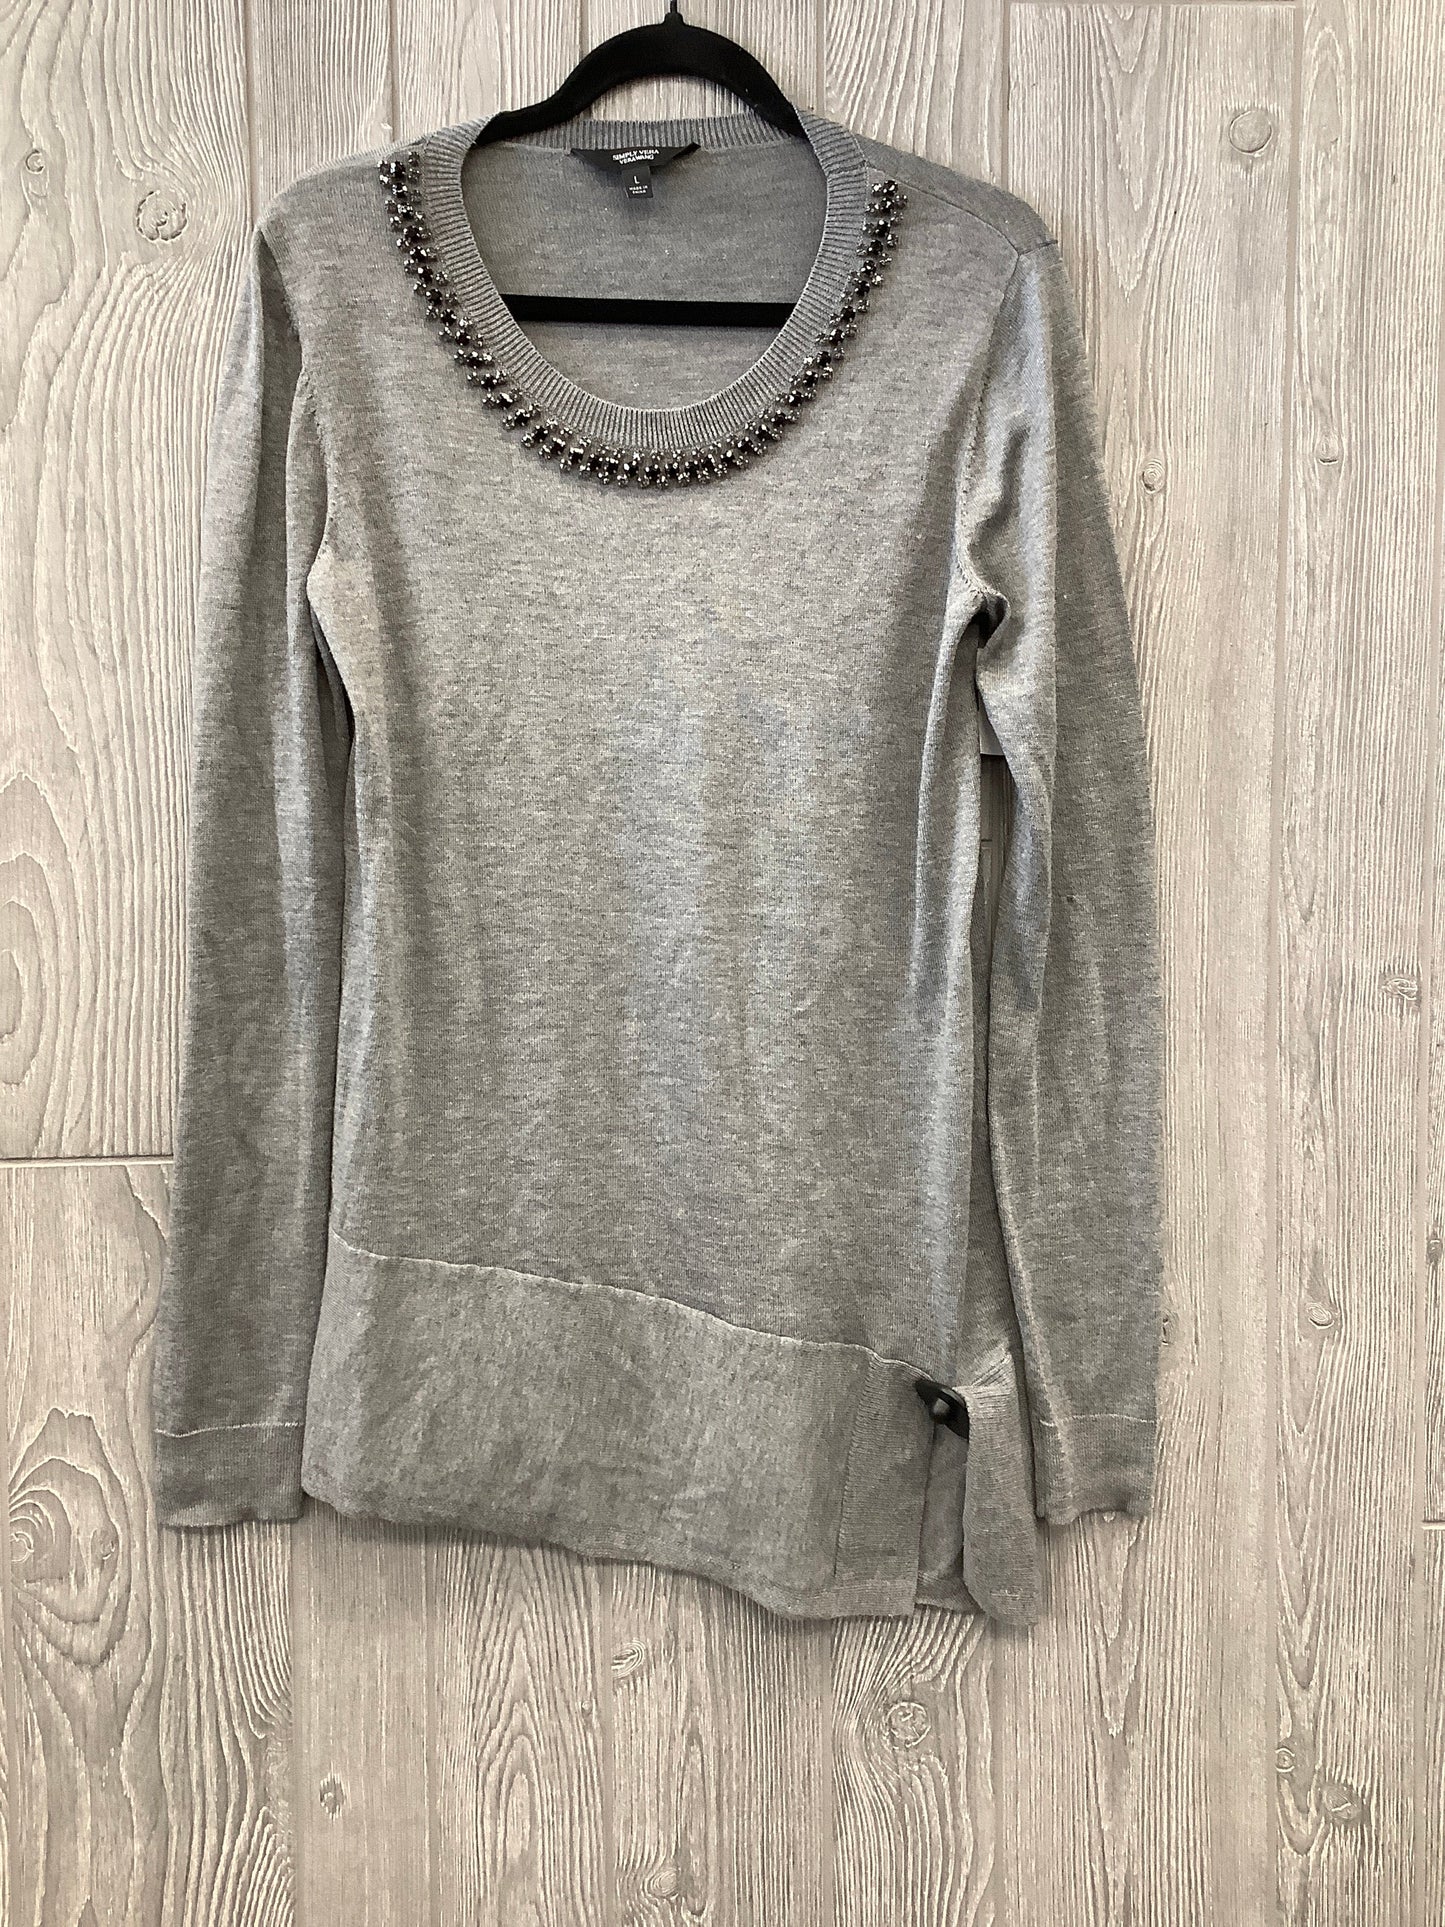 Grey Top Long Sleeve Simply Vera, Size L